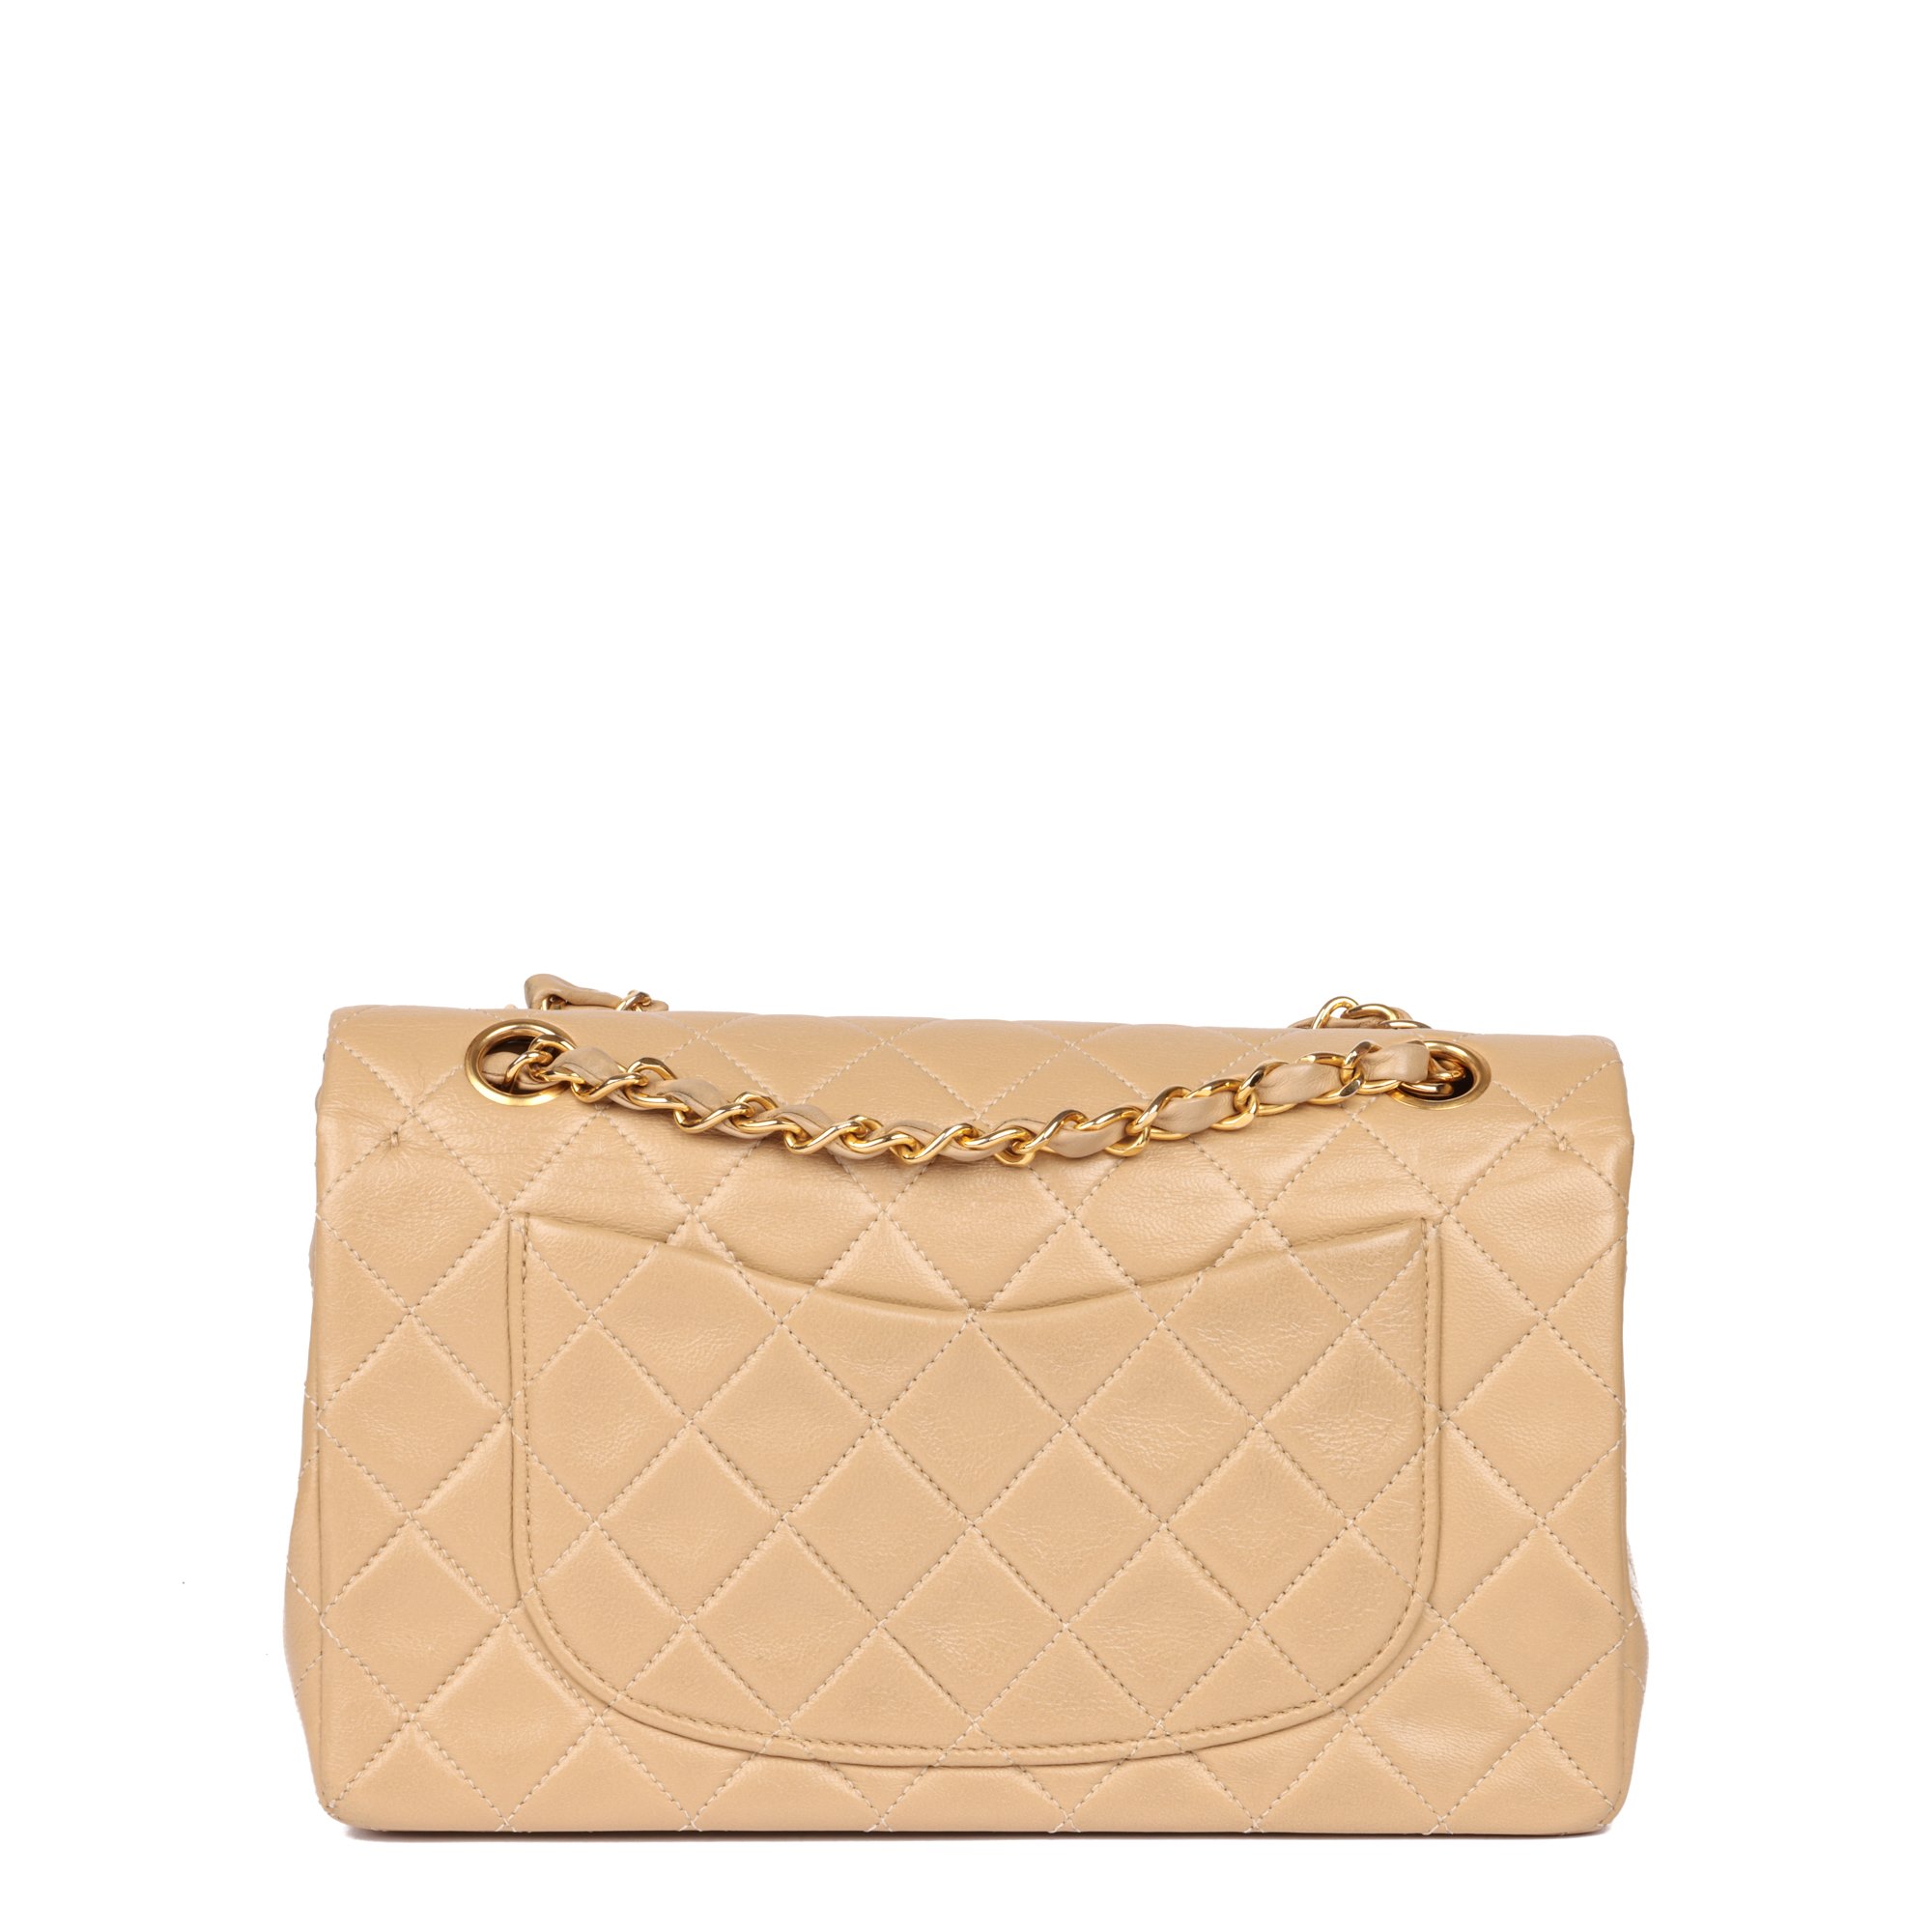 Chanel Beige Quilted Lambskin Vintage Small Classic Double Flap Bag